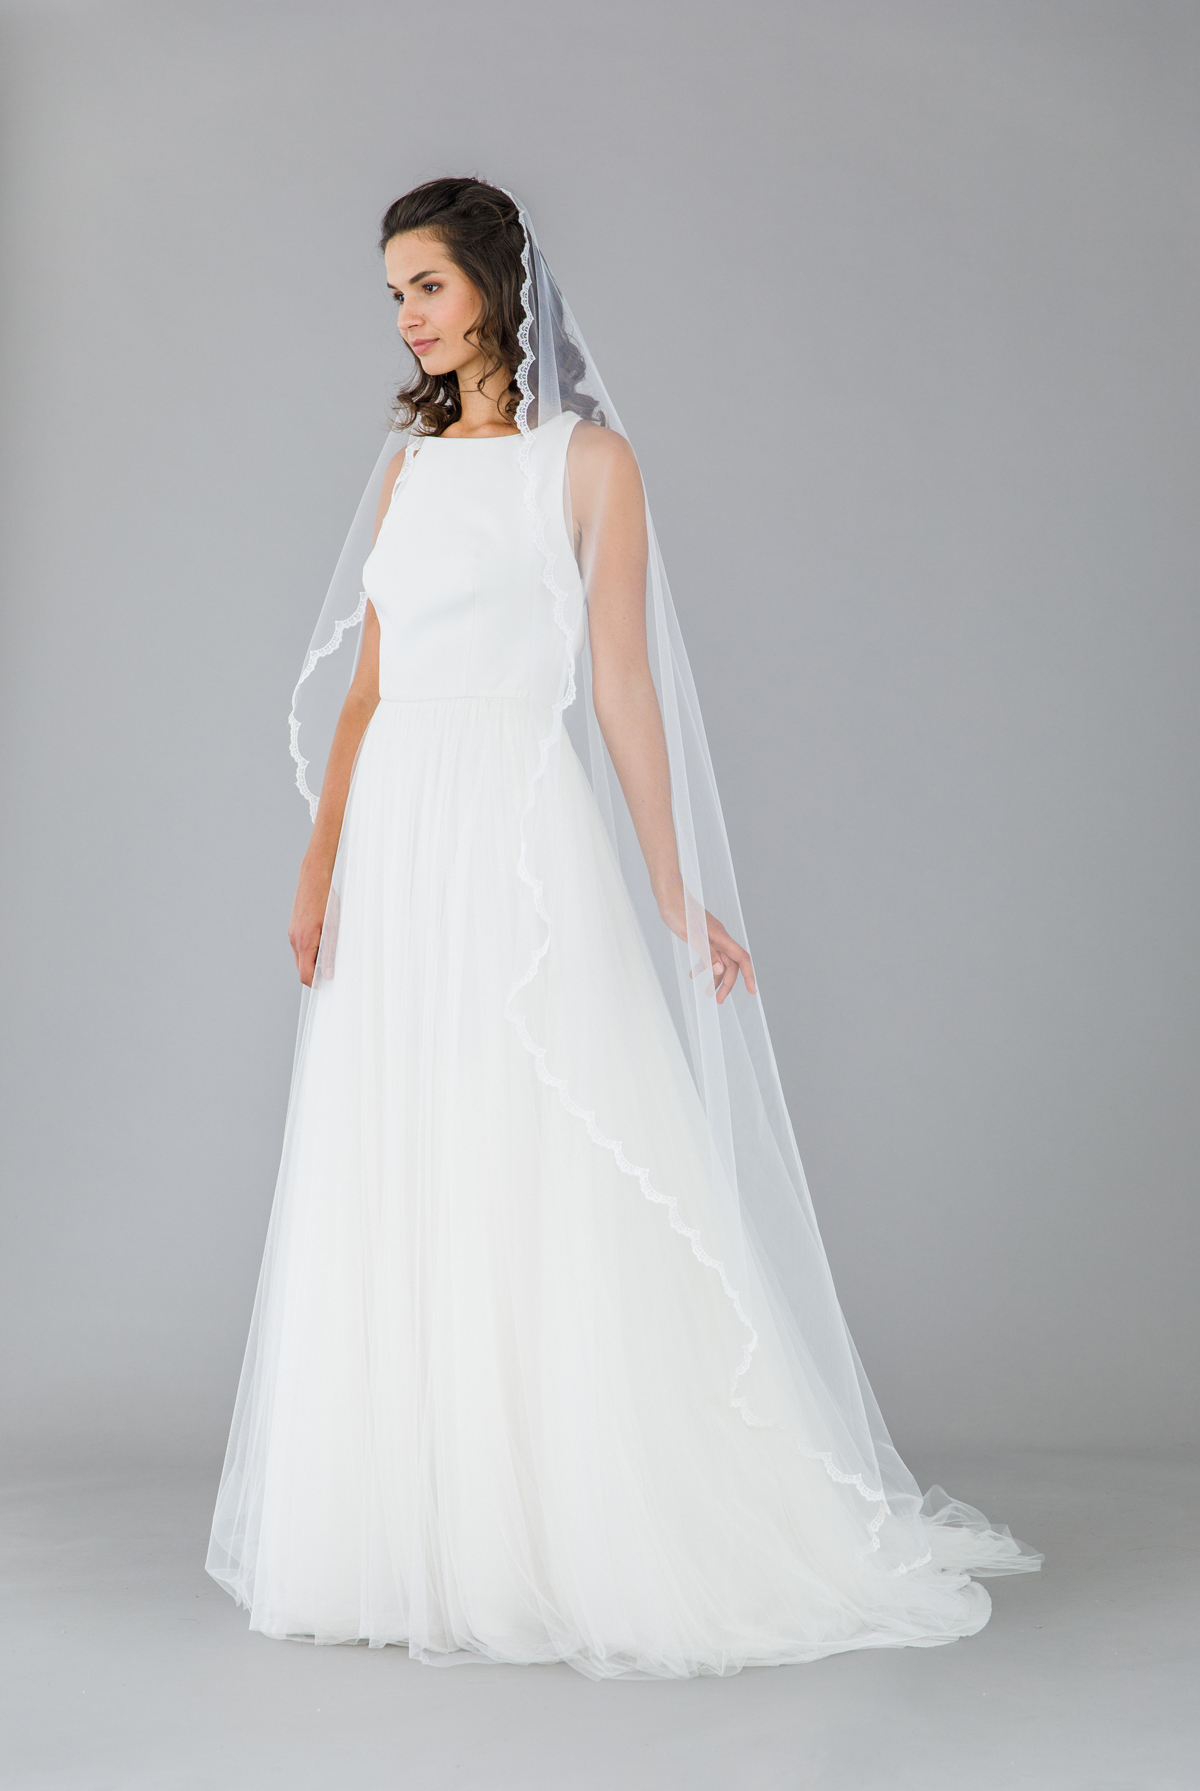 Adeline - a full lace edged, barely there wedding veil